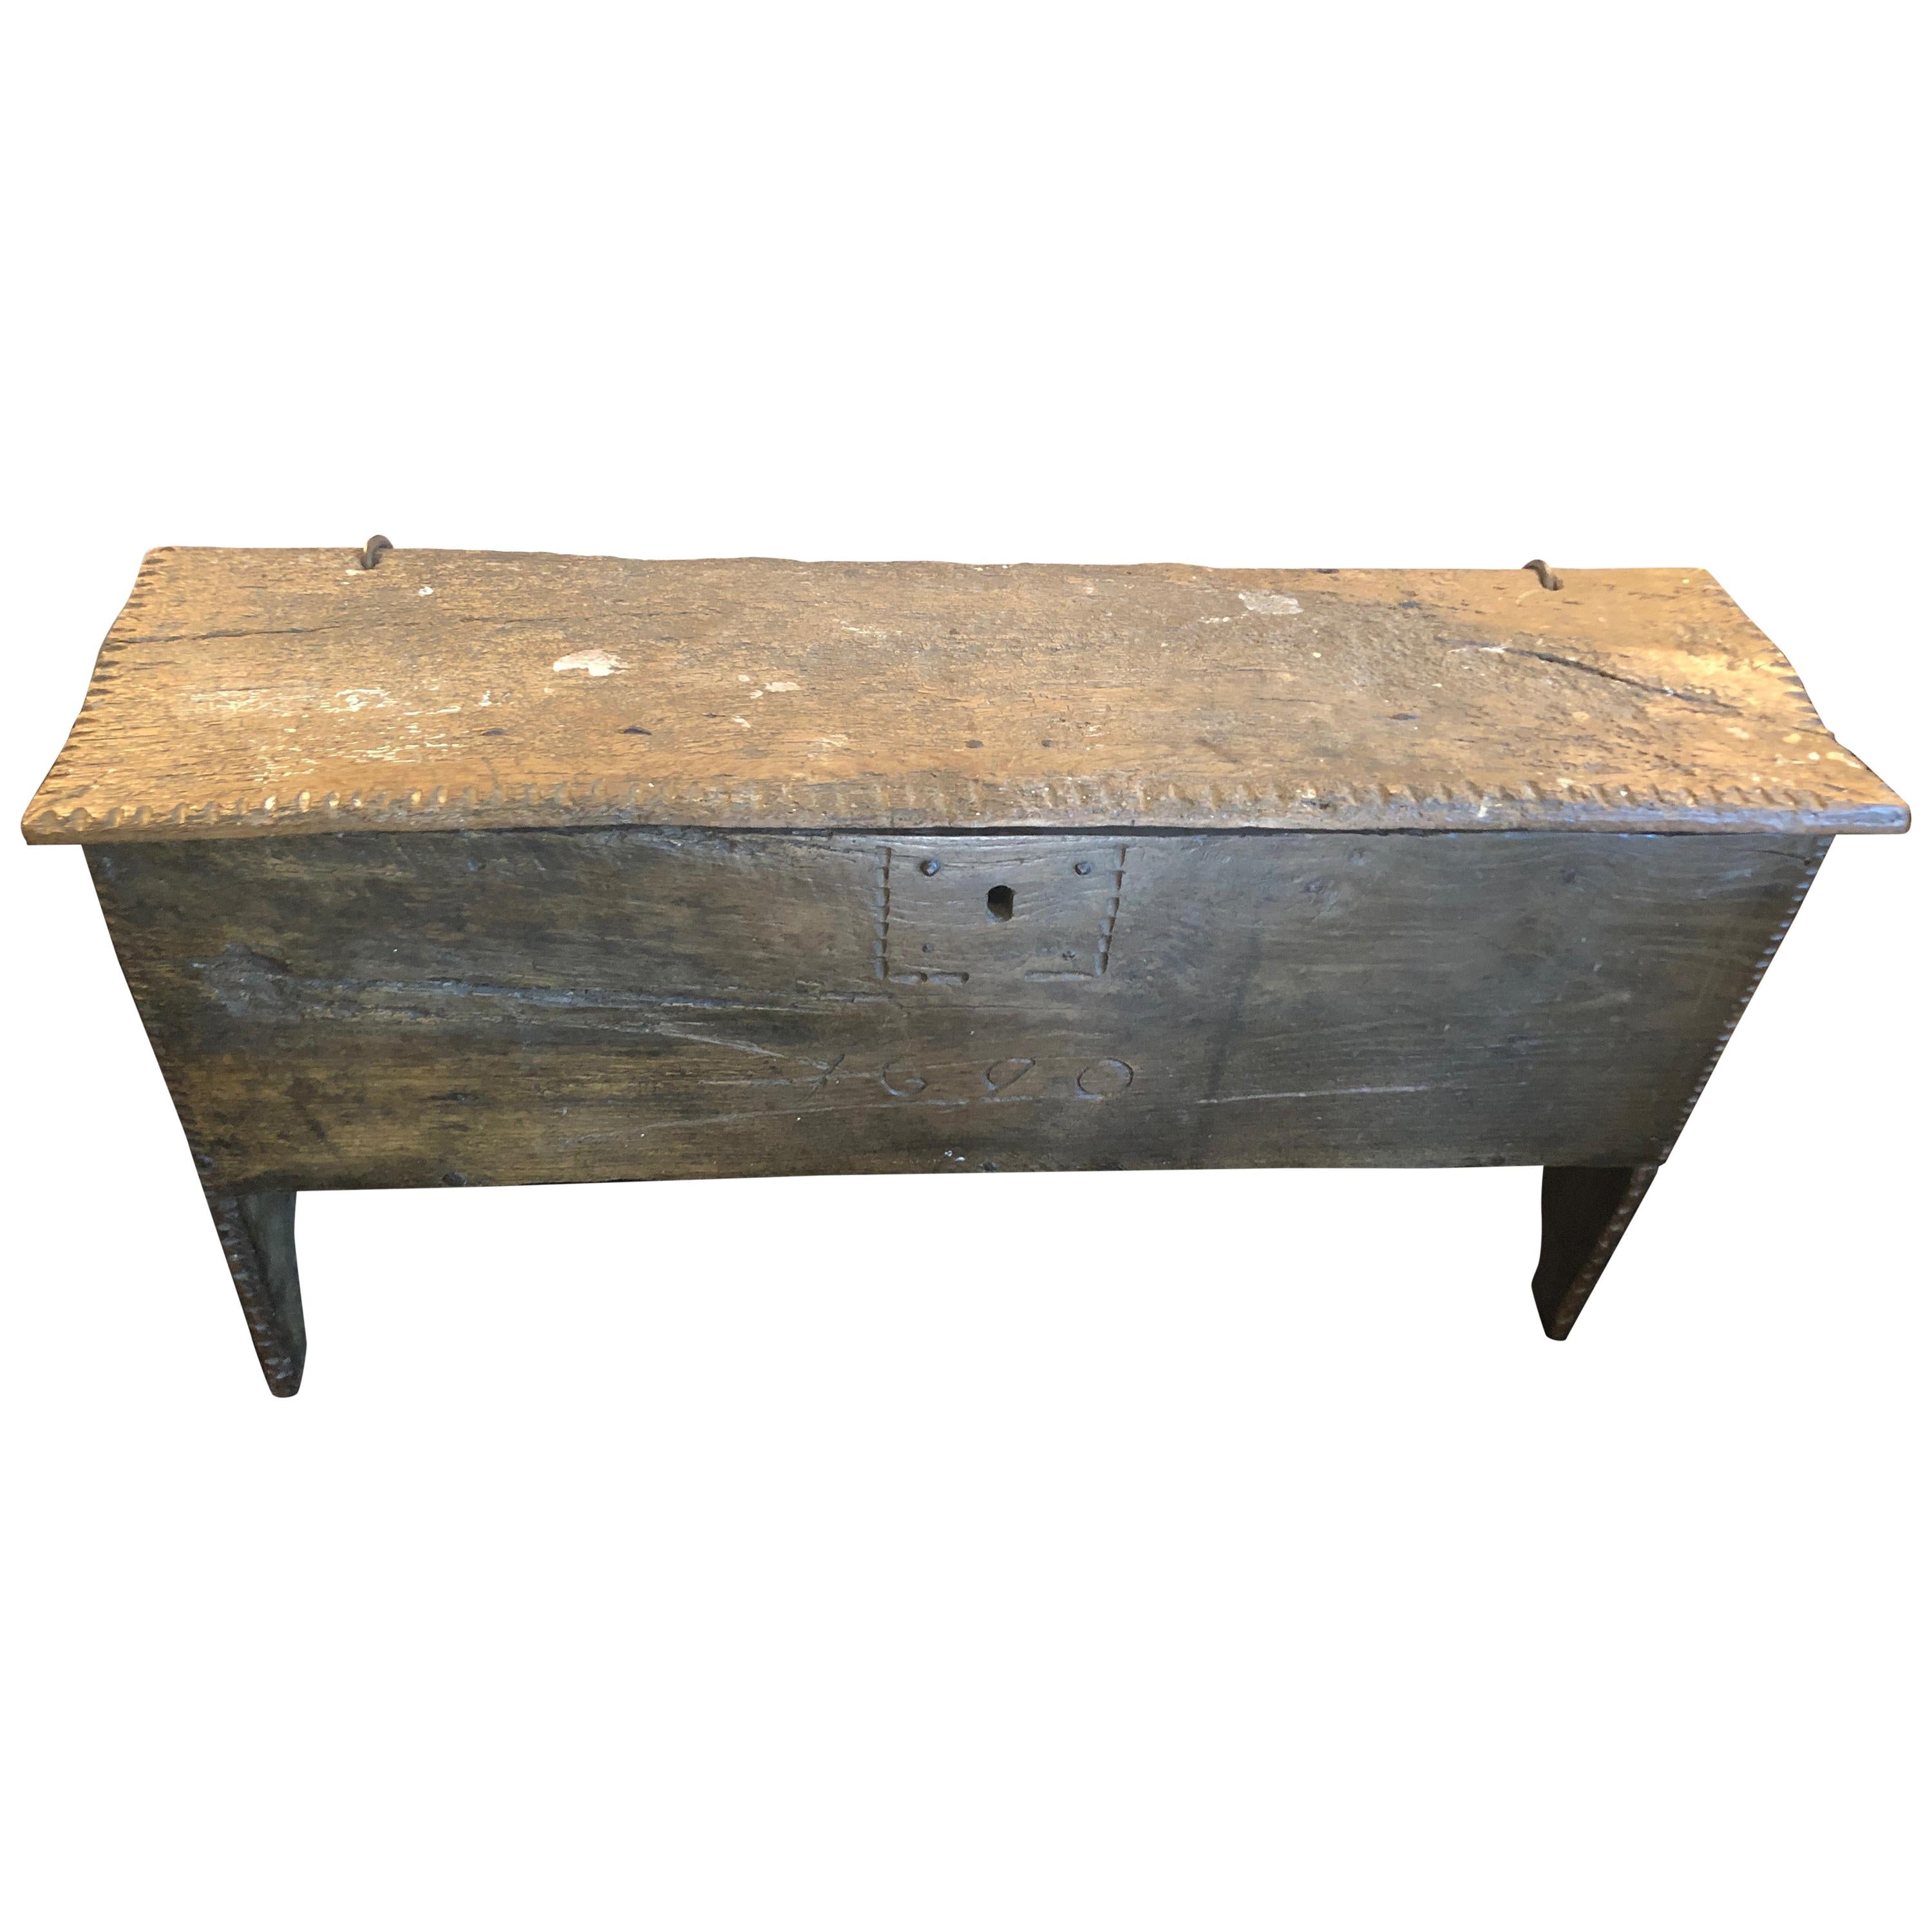 Wonderful Very Early Narrow Rustic British Wooden Coffer Trunk Coffee Table